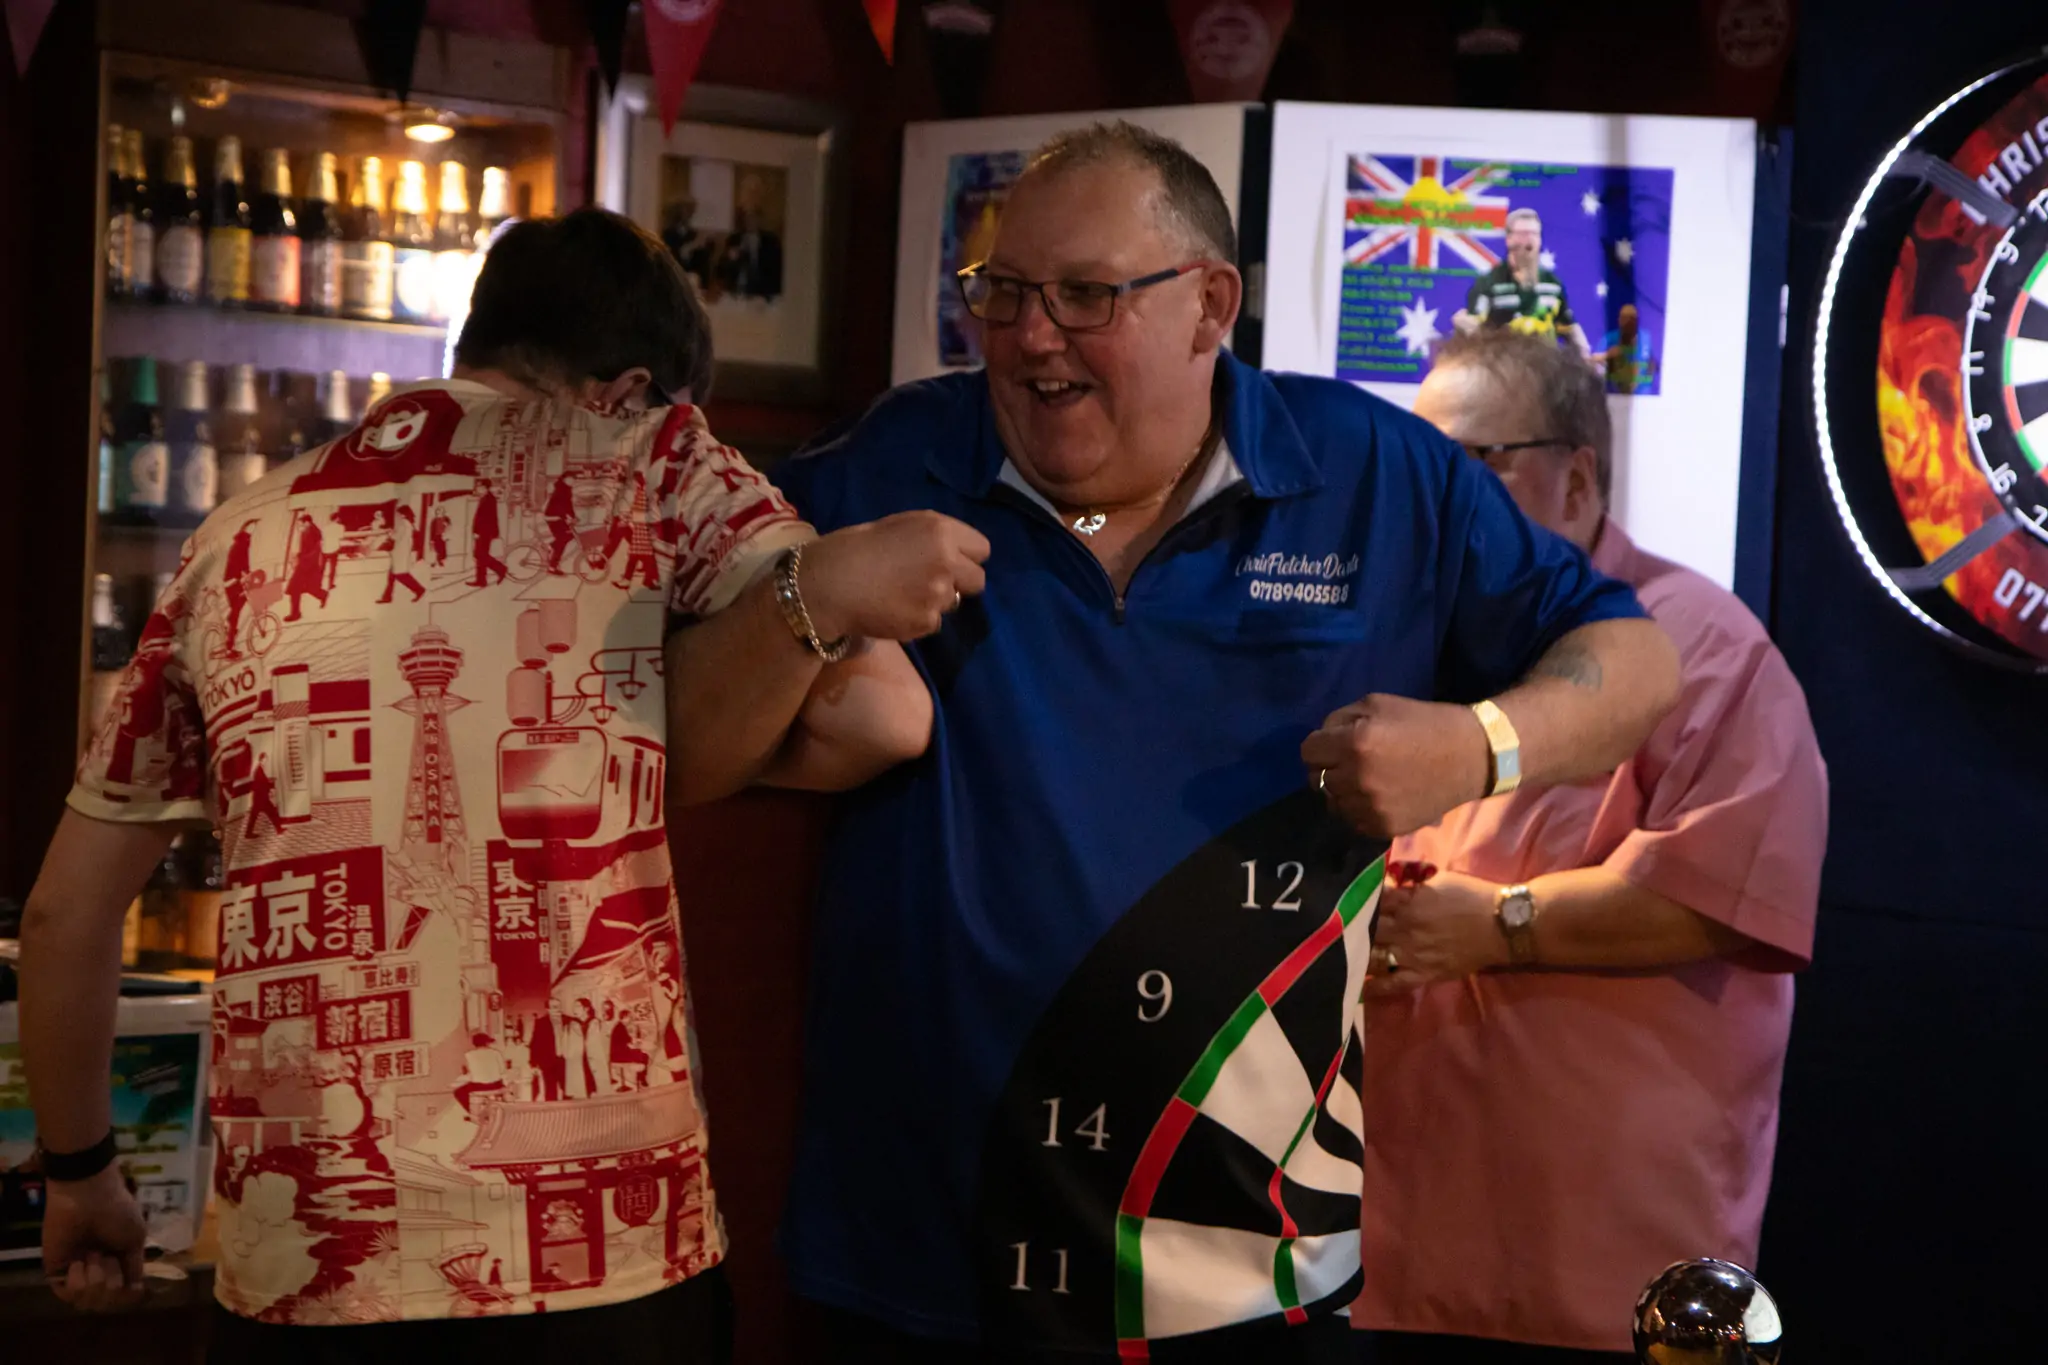 Peter Manley Pro Darts Player at the Batemans 150th anniversary celebrations darts, Chris Fletcher dancing with one of the competitors.